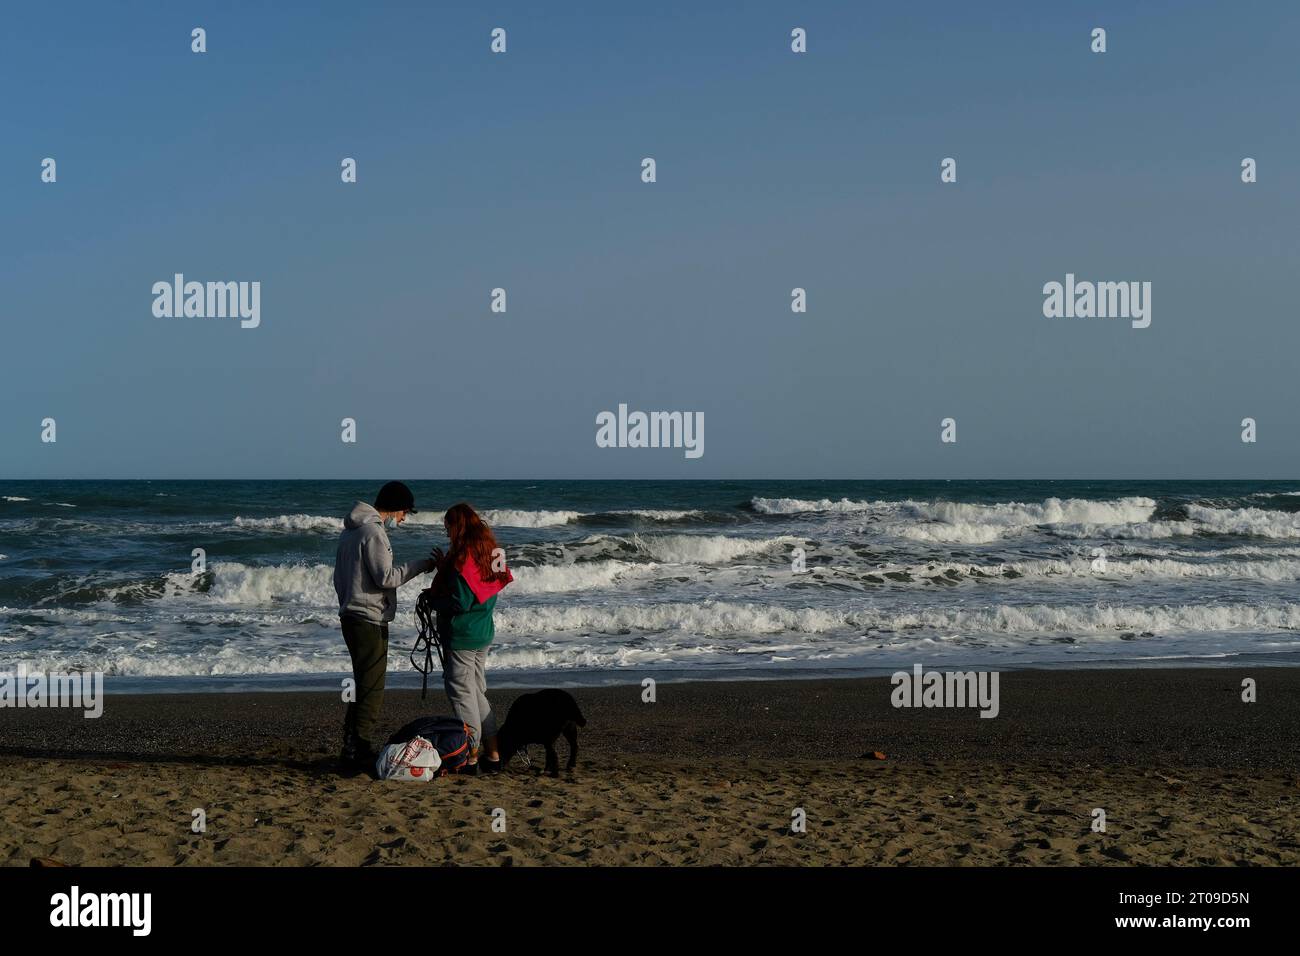 Couple on the beach, winter day with lots of waves Stock Photo